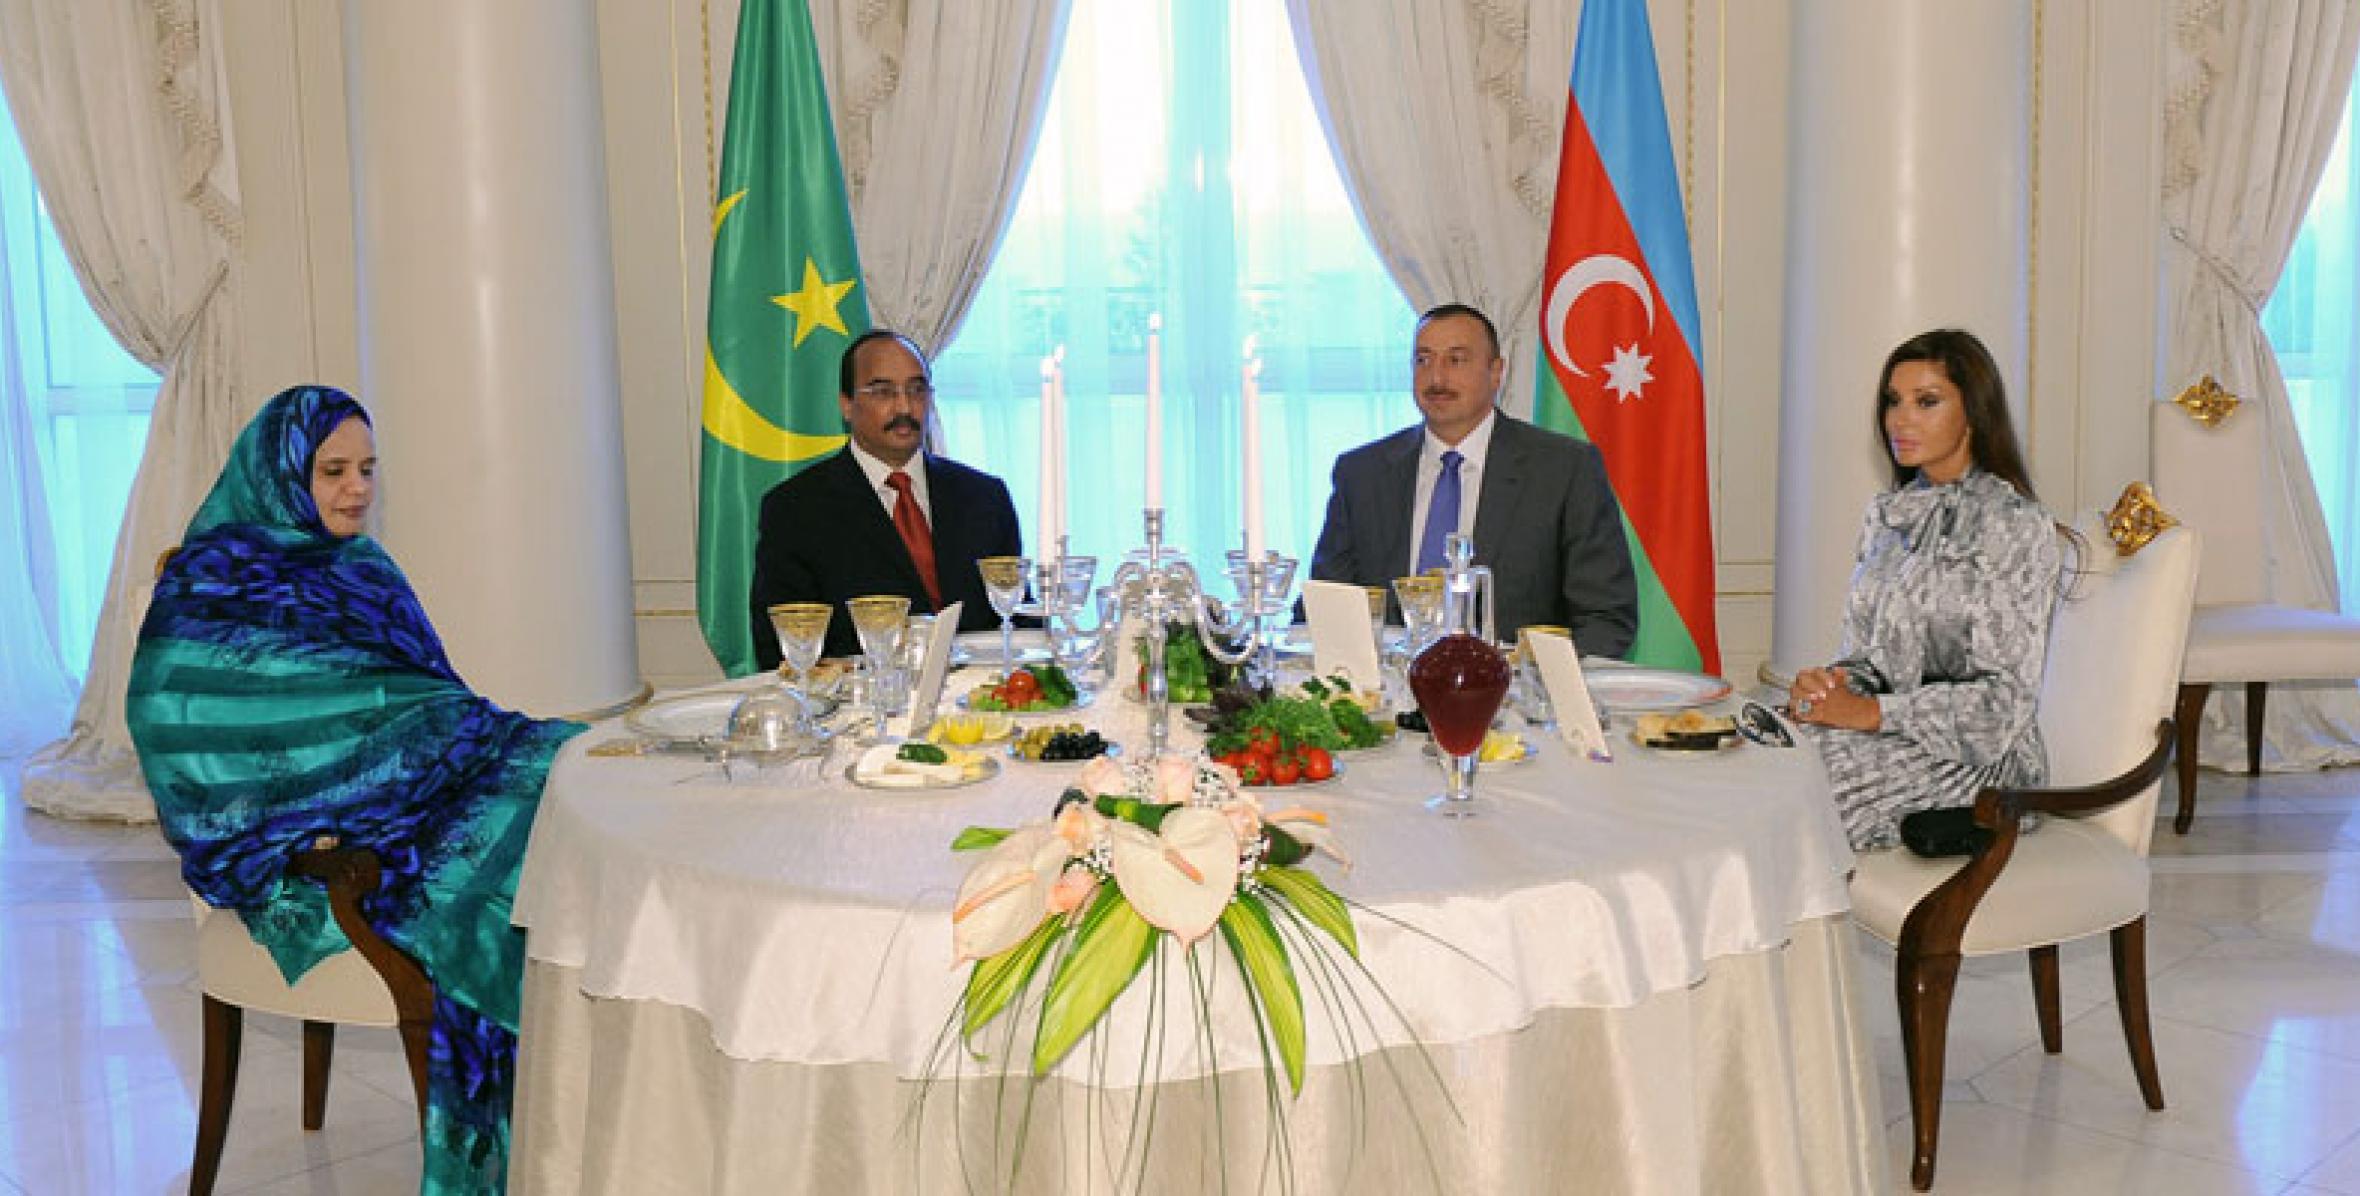 An official dinner was organized in honor of Mauritanian President Mohamed Ould Abdel Aziz